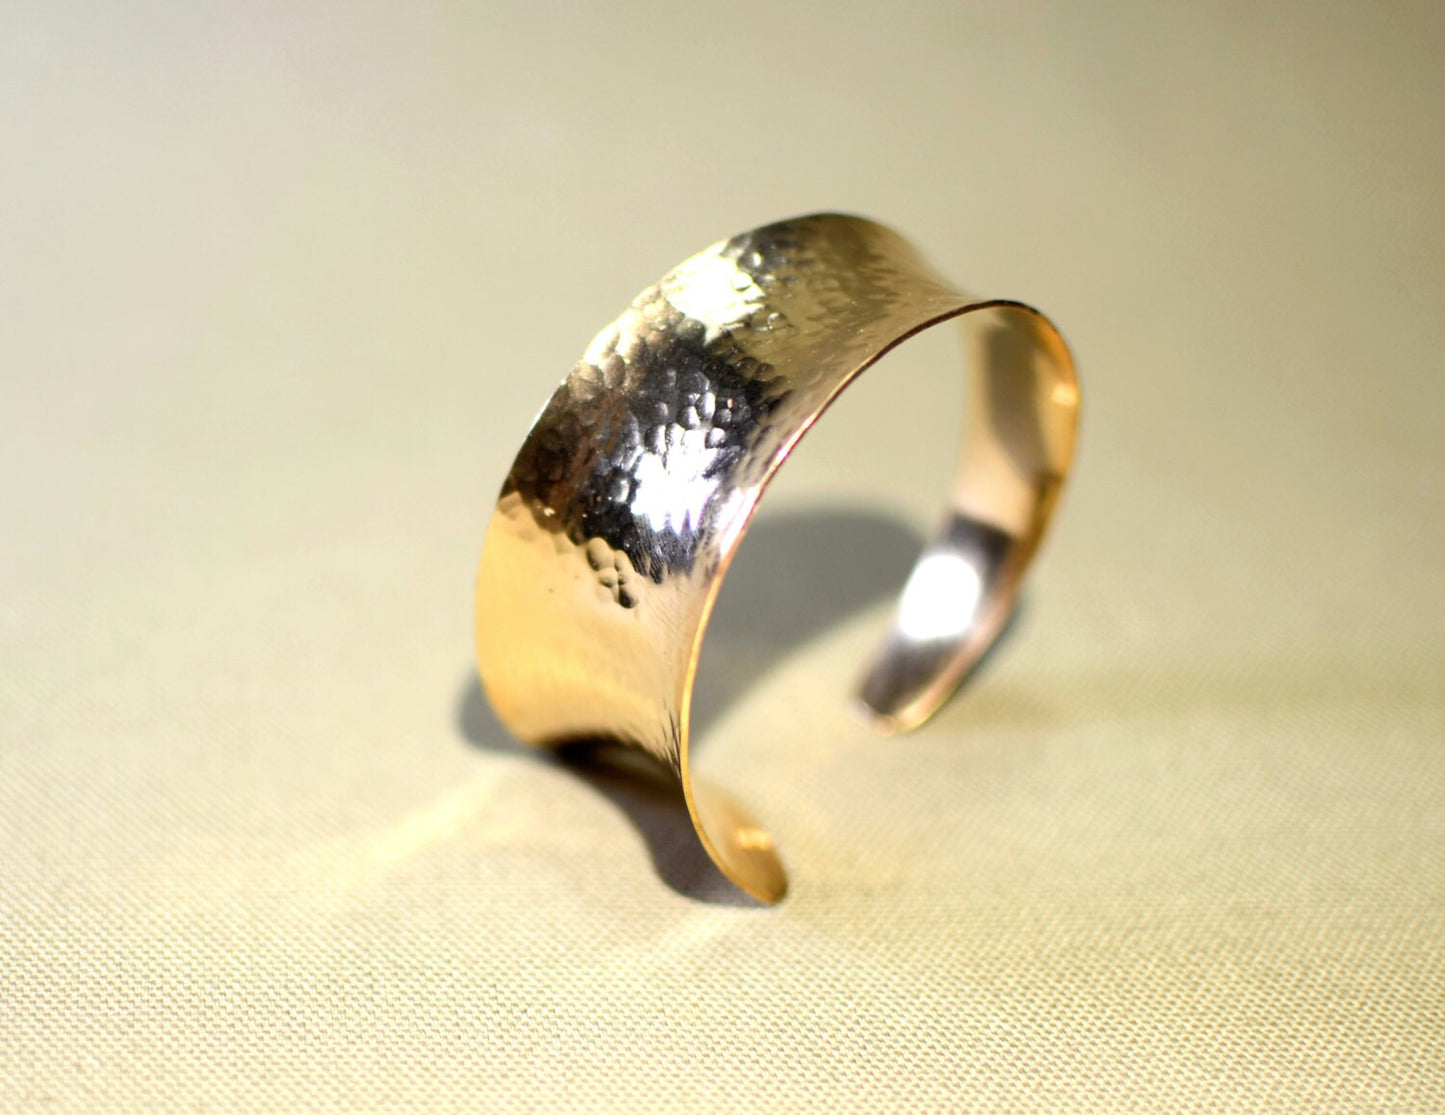 Hammered Bronze and Anticlastic Statement Cuff Bracelet